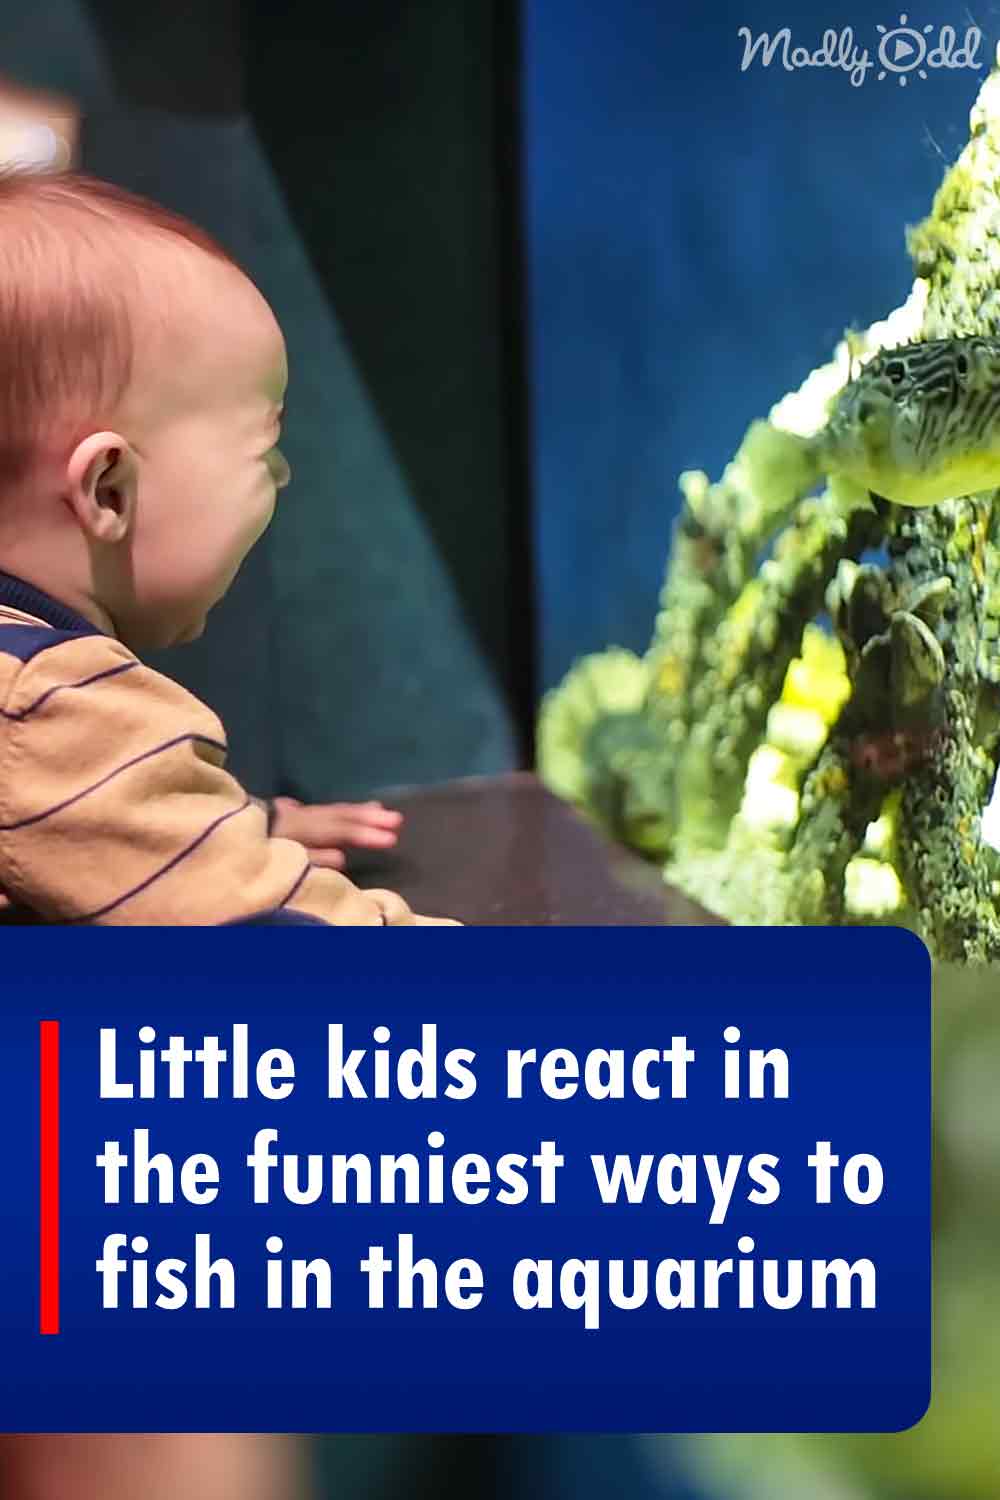 Little kids react in the funniest ways to fish in the aquarium